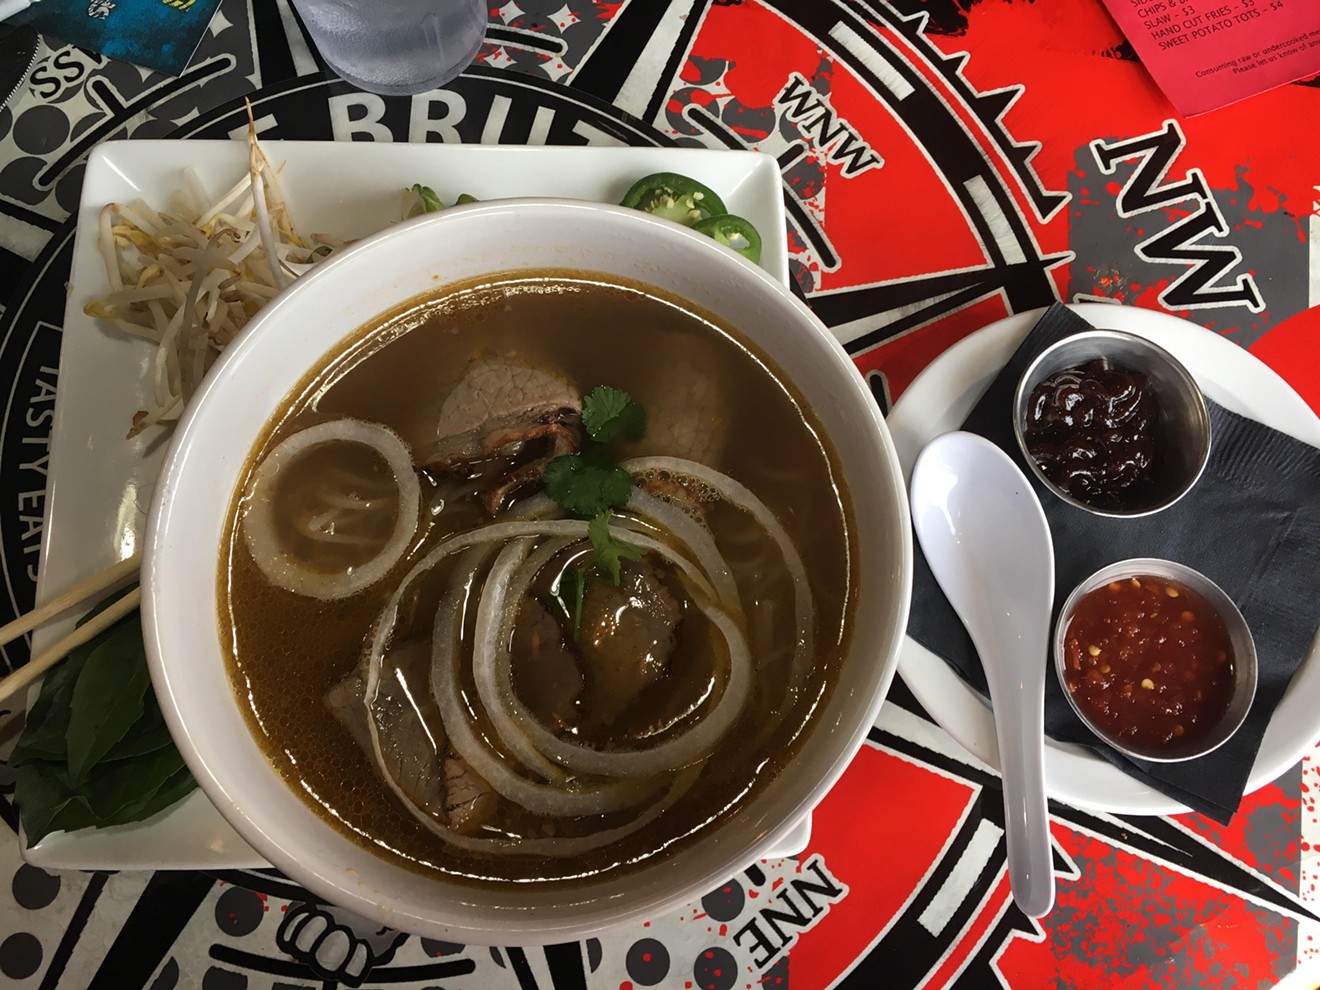 The Brutal Poodle makes a rich and satisfying beef brisket pho.